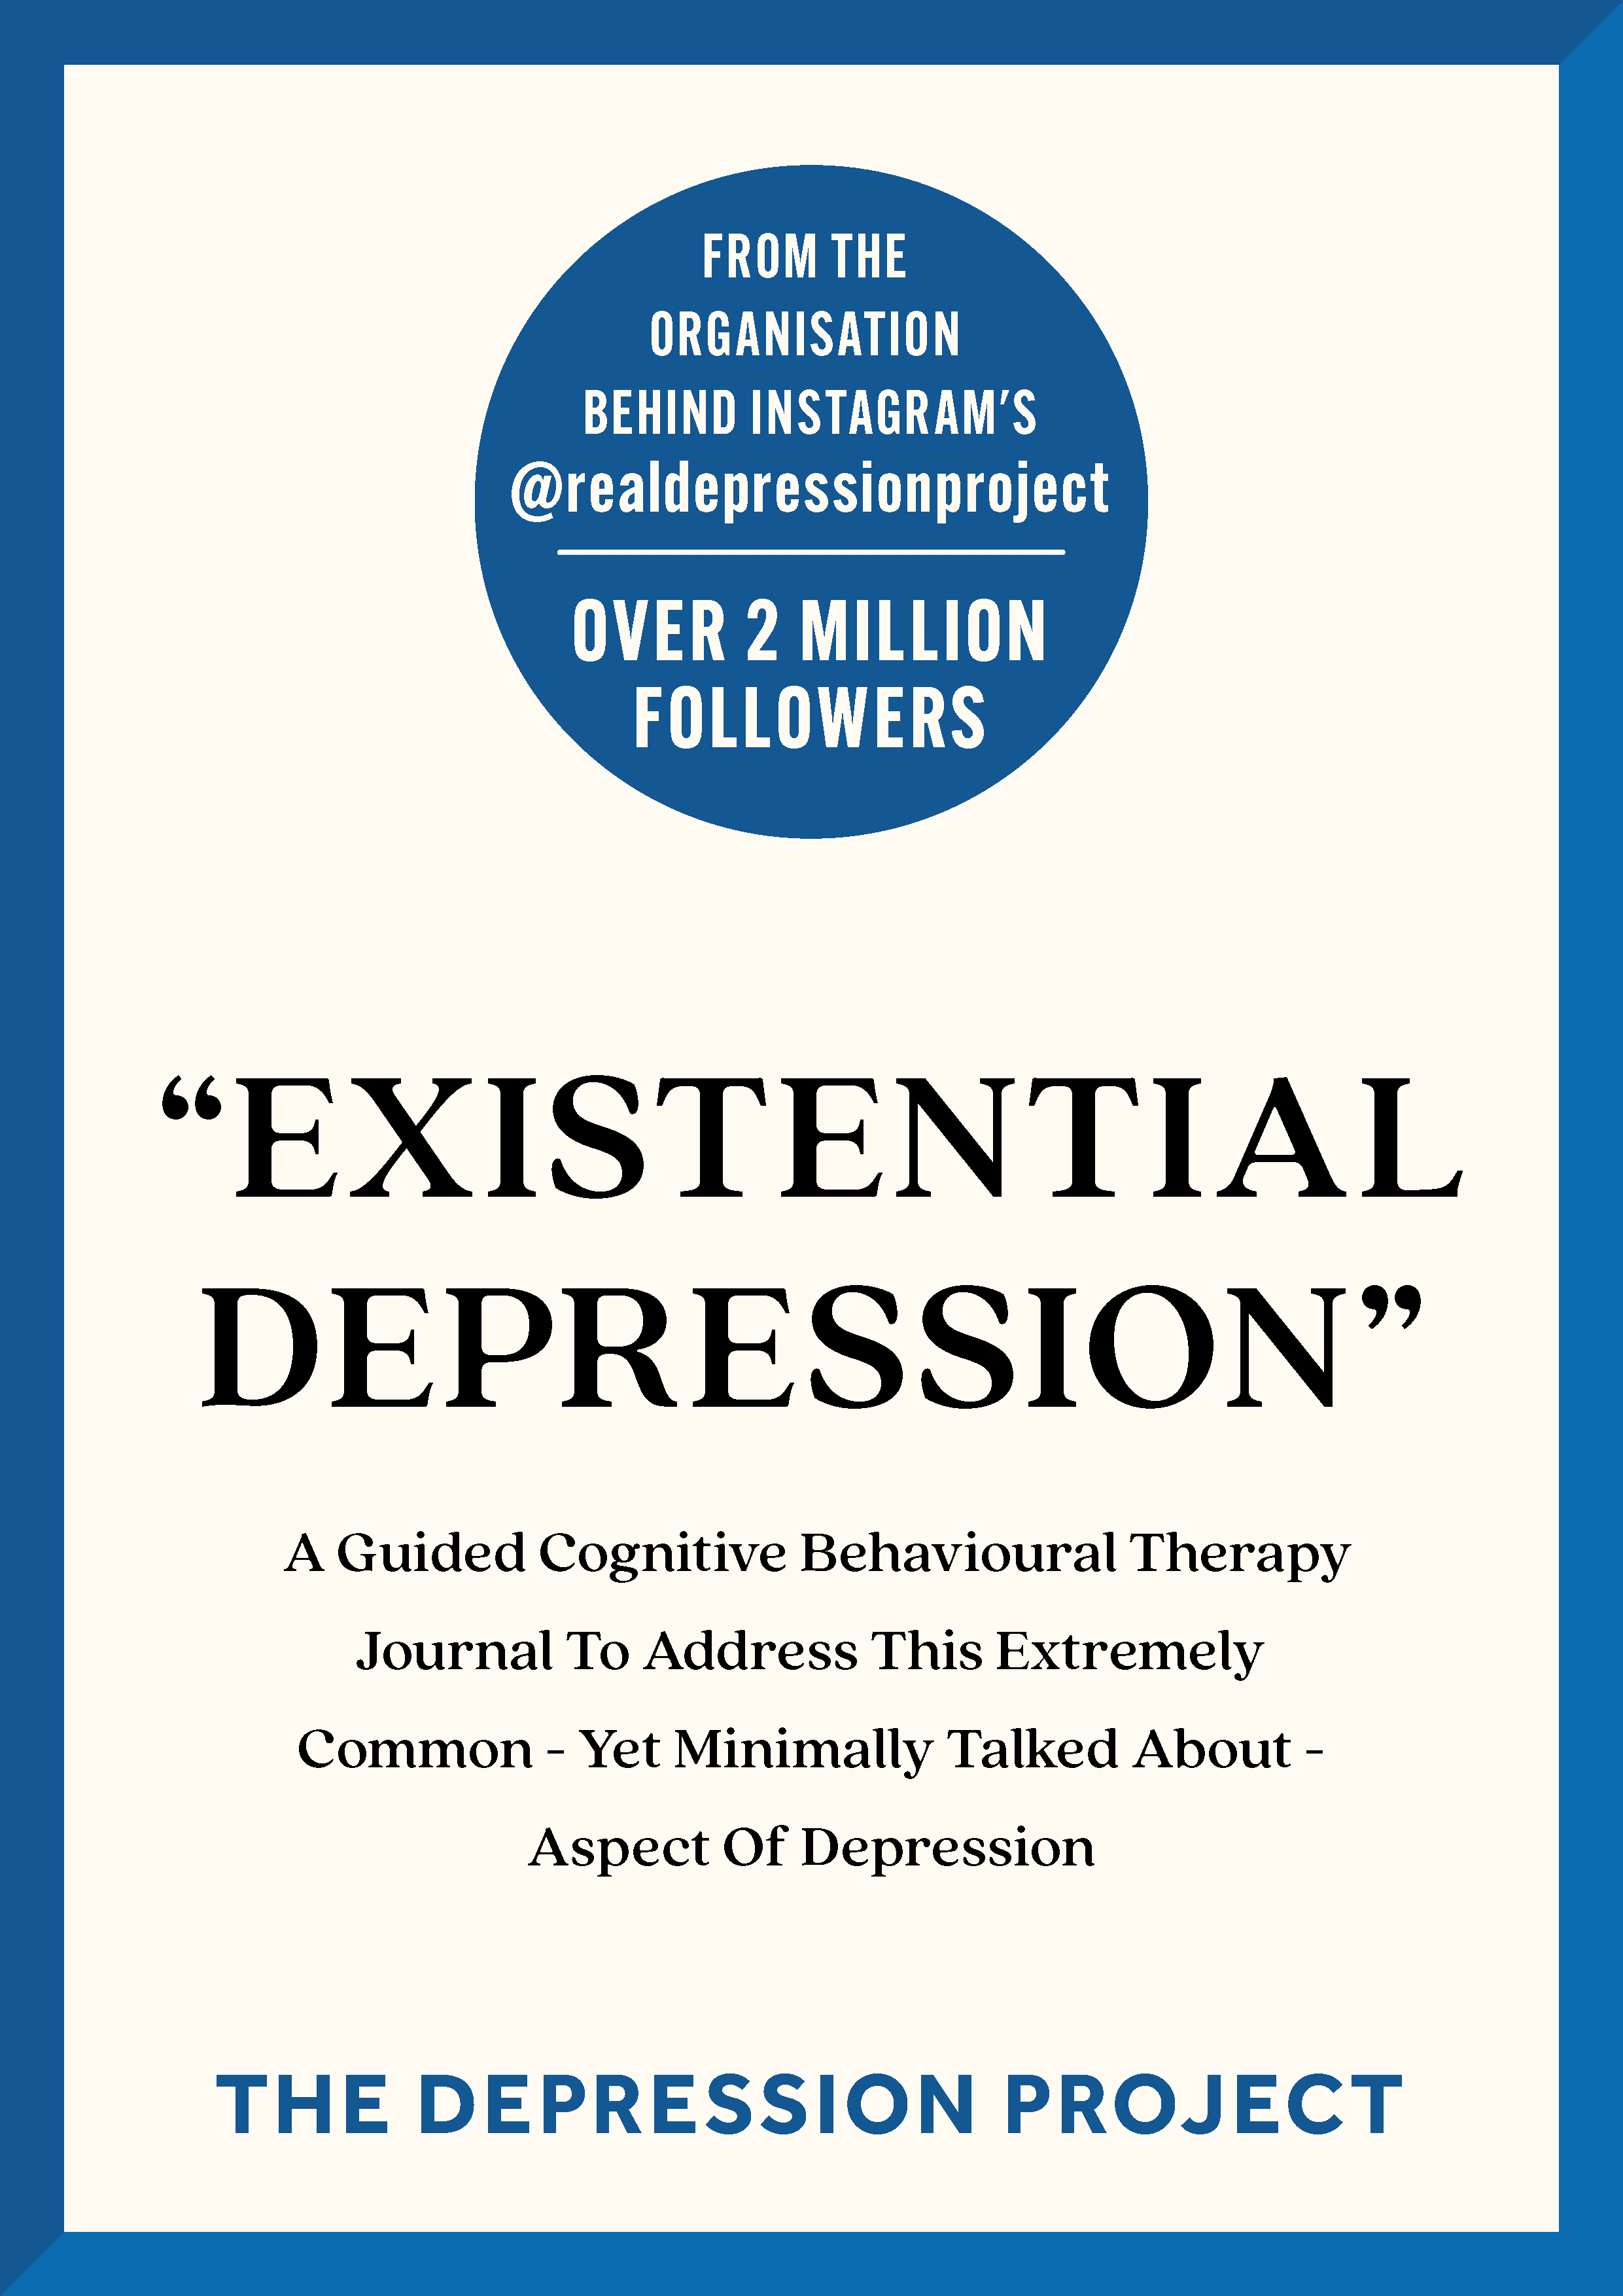 The Existential Depression Journal